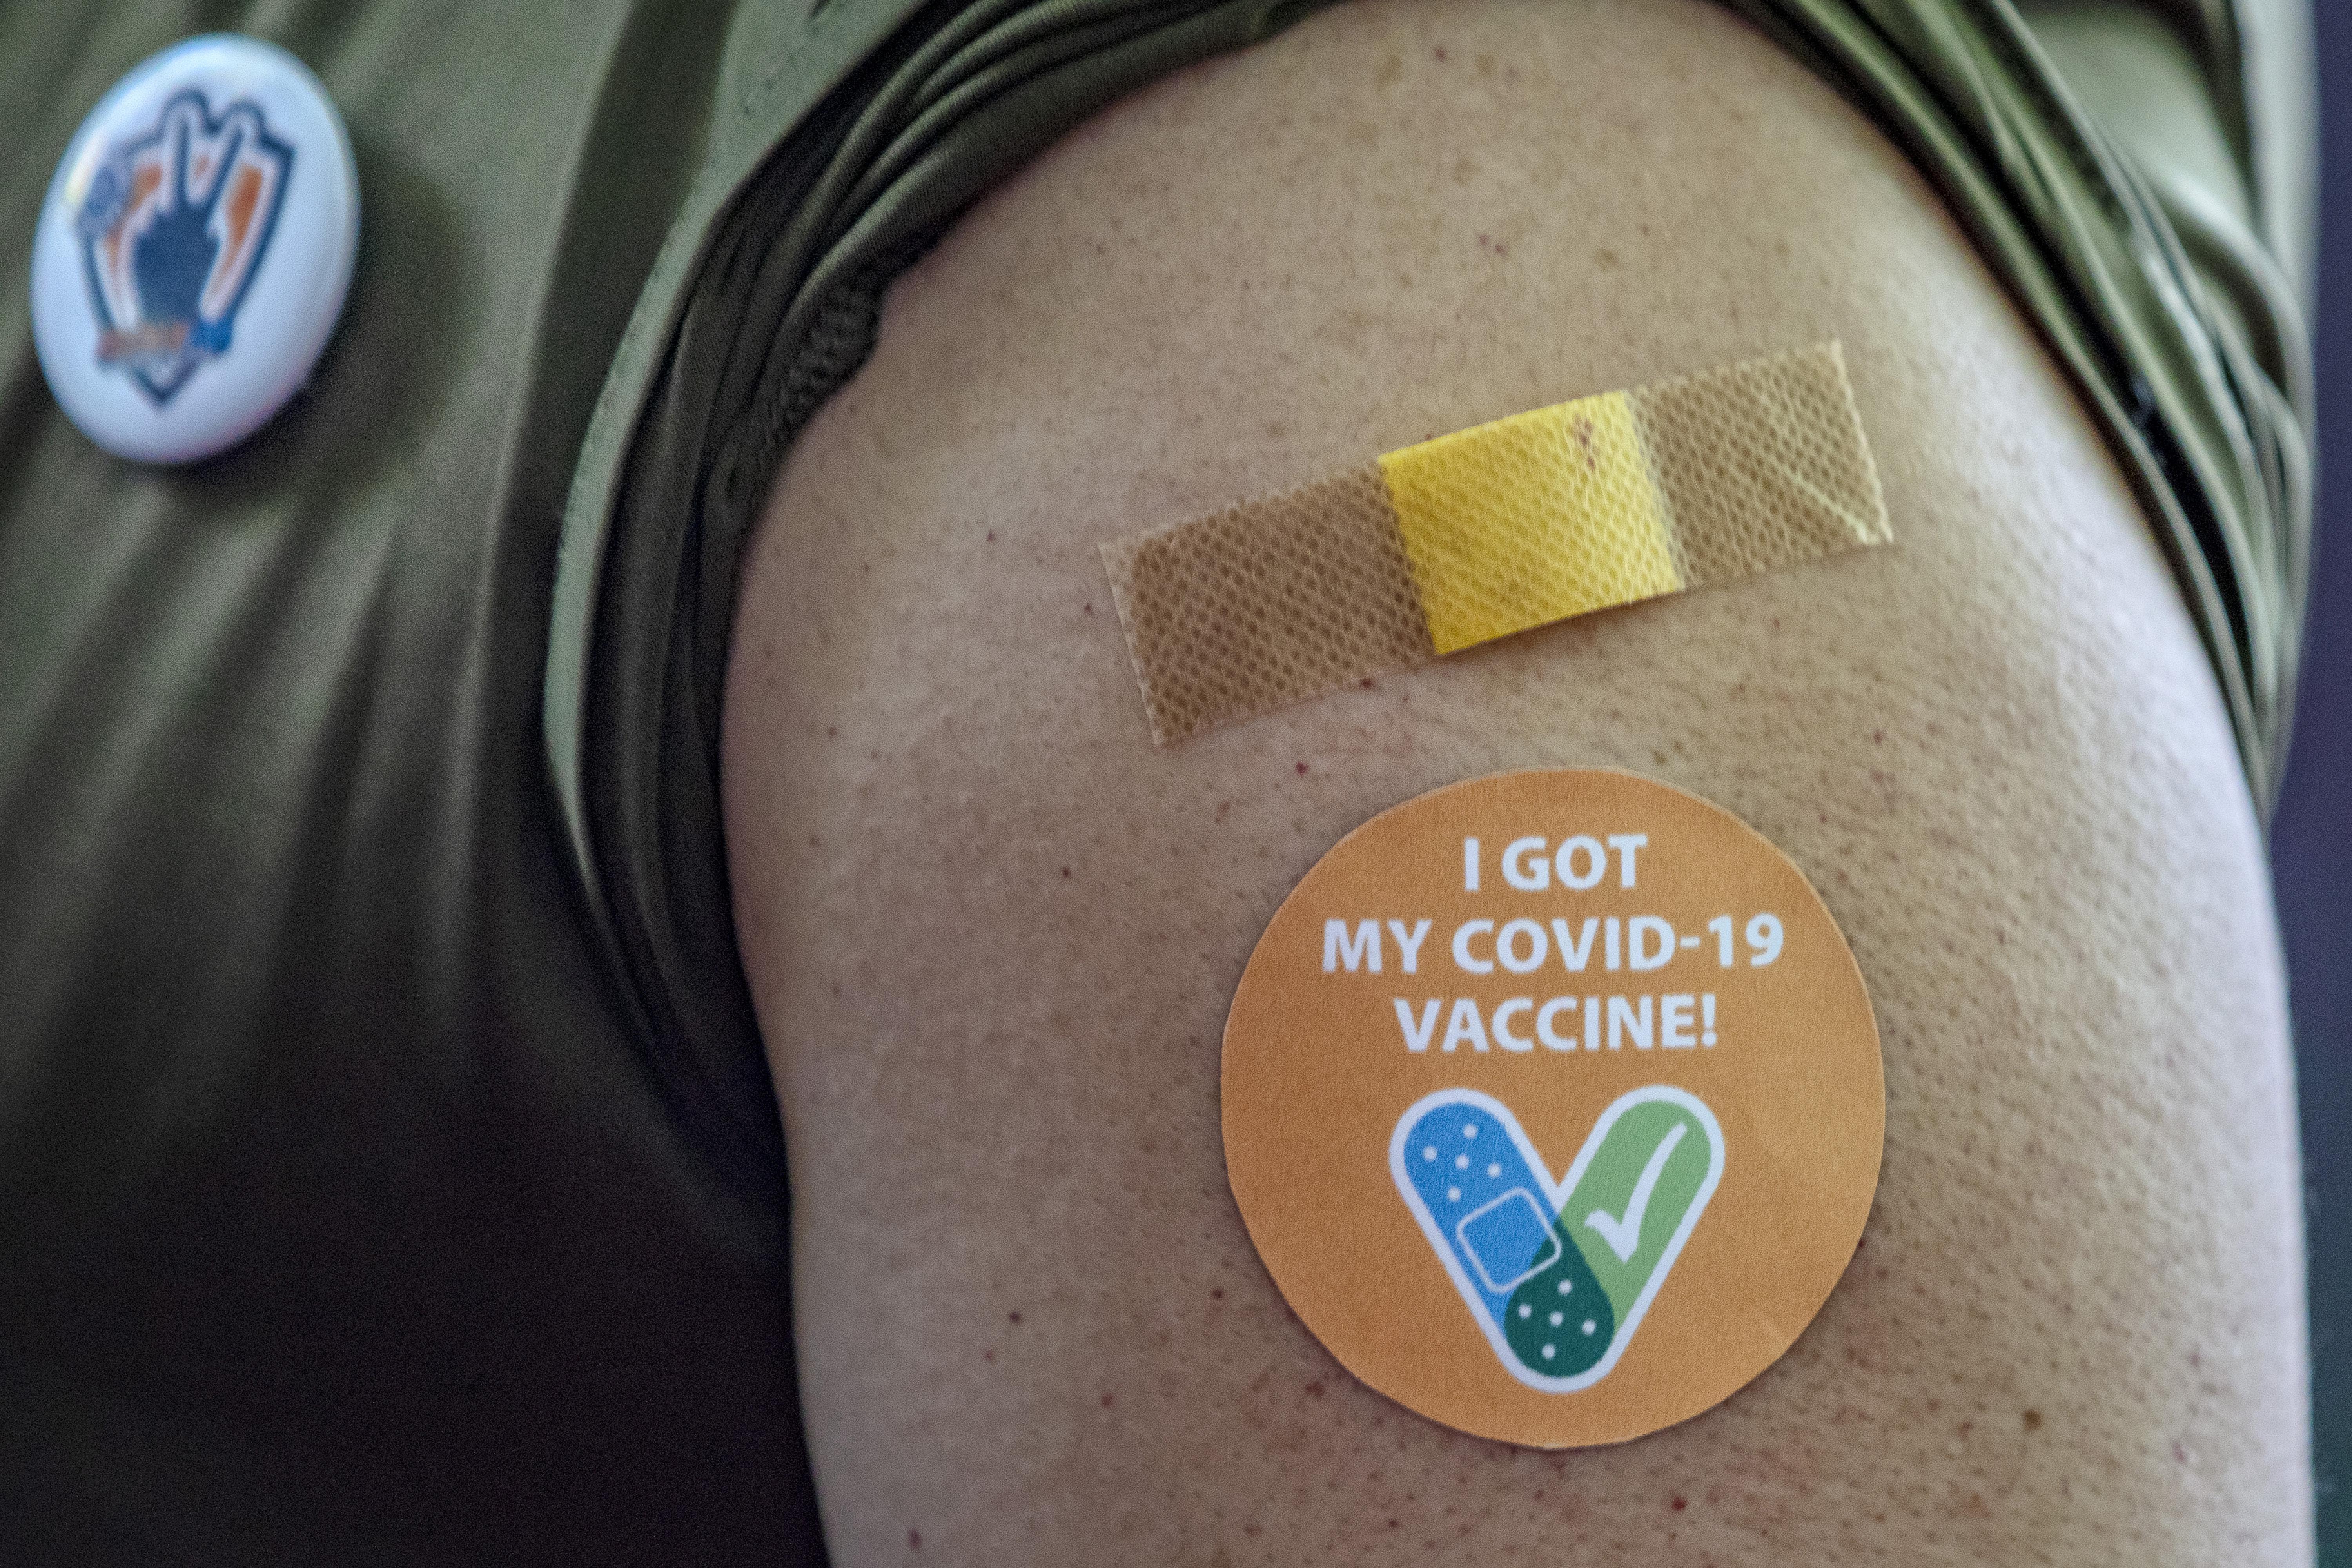 A person's arm with a Band-Aid and a sticker on it that says "I Got My COVID-19 Vaccine!"